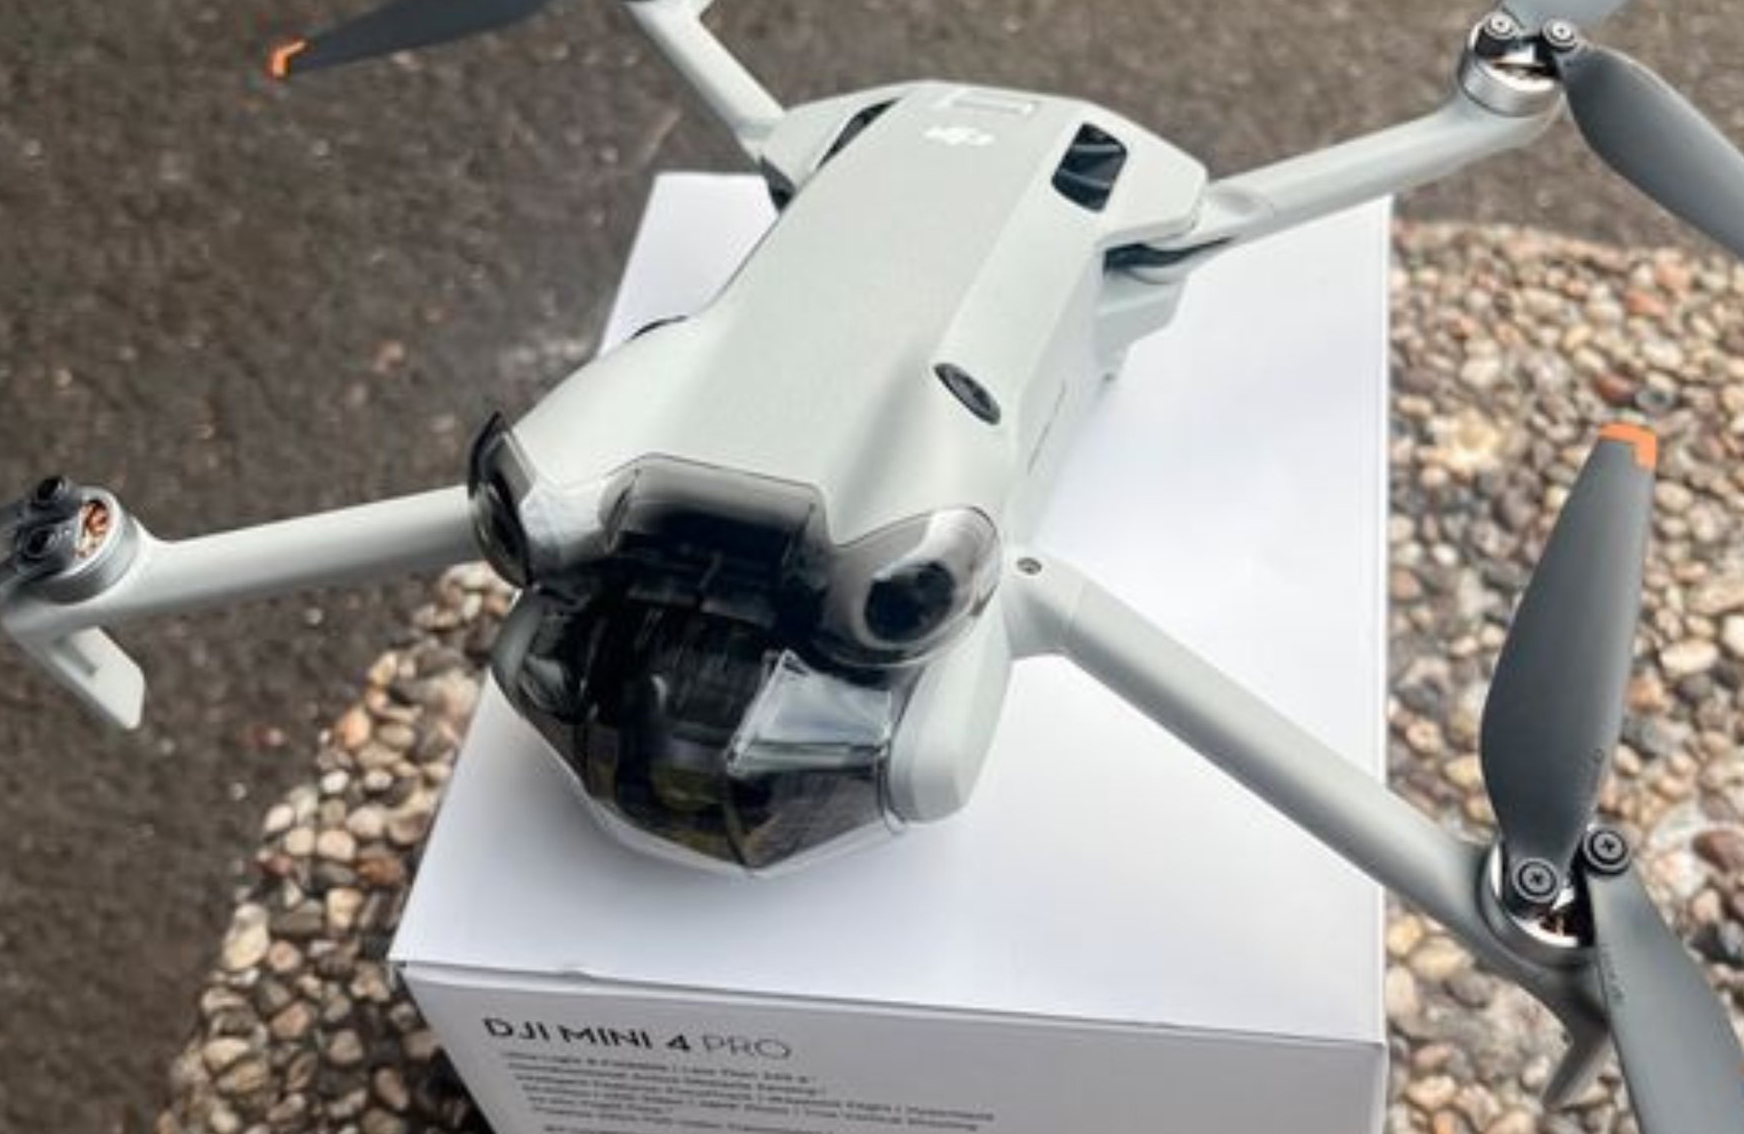 The DJI Mini 4 Pro Details and Price